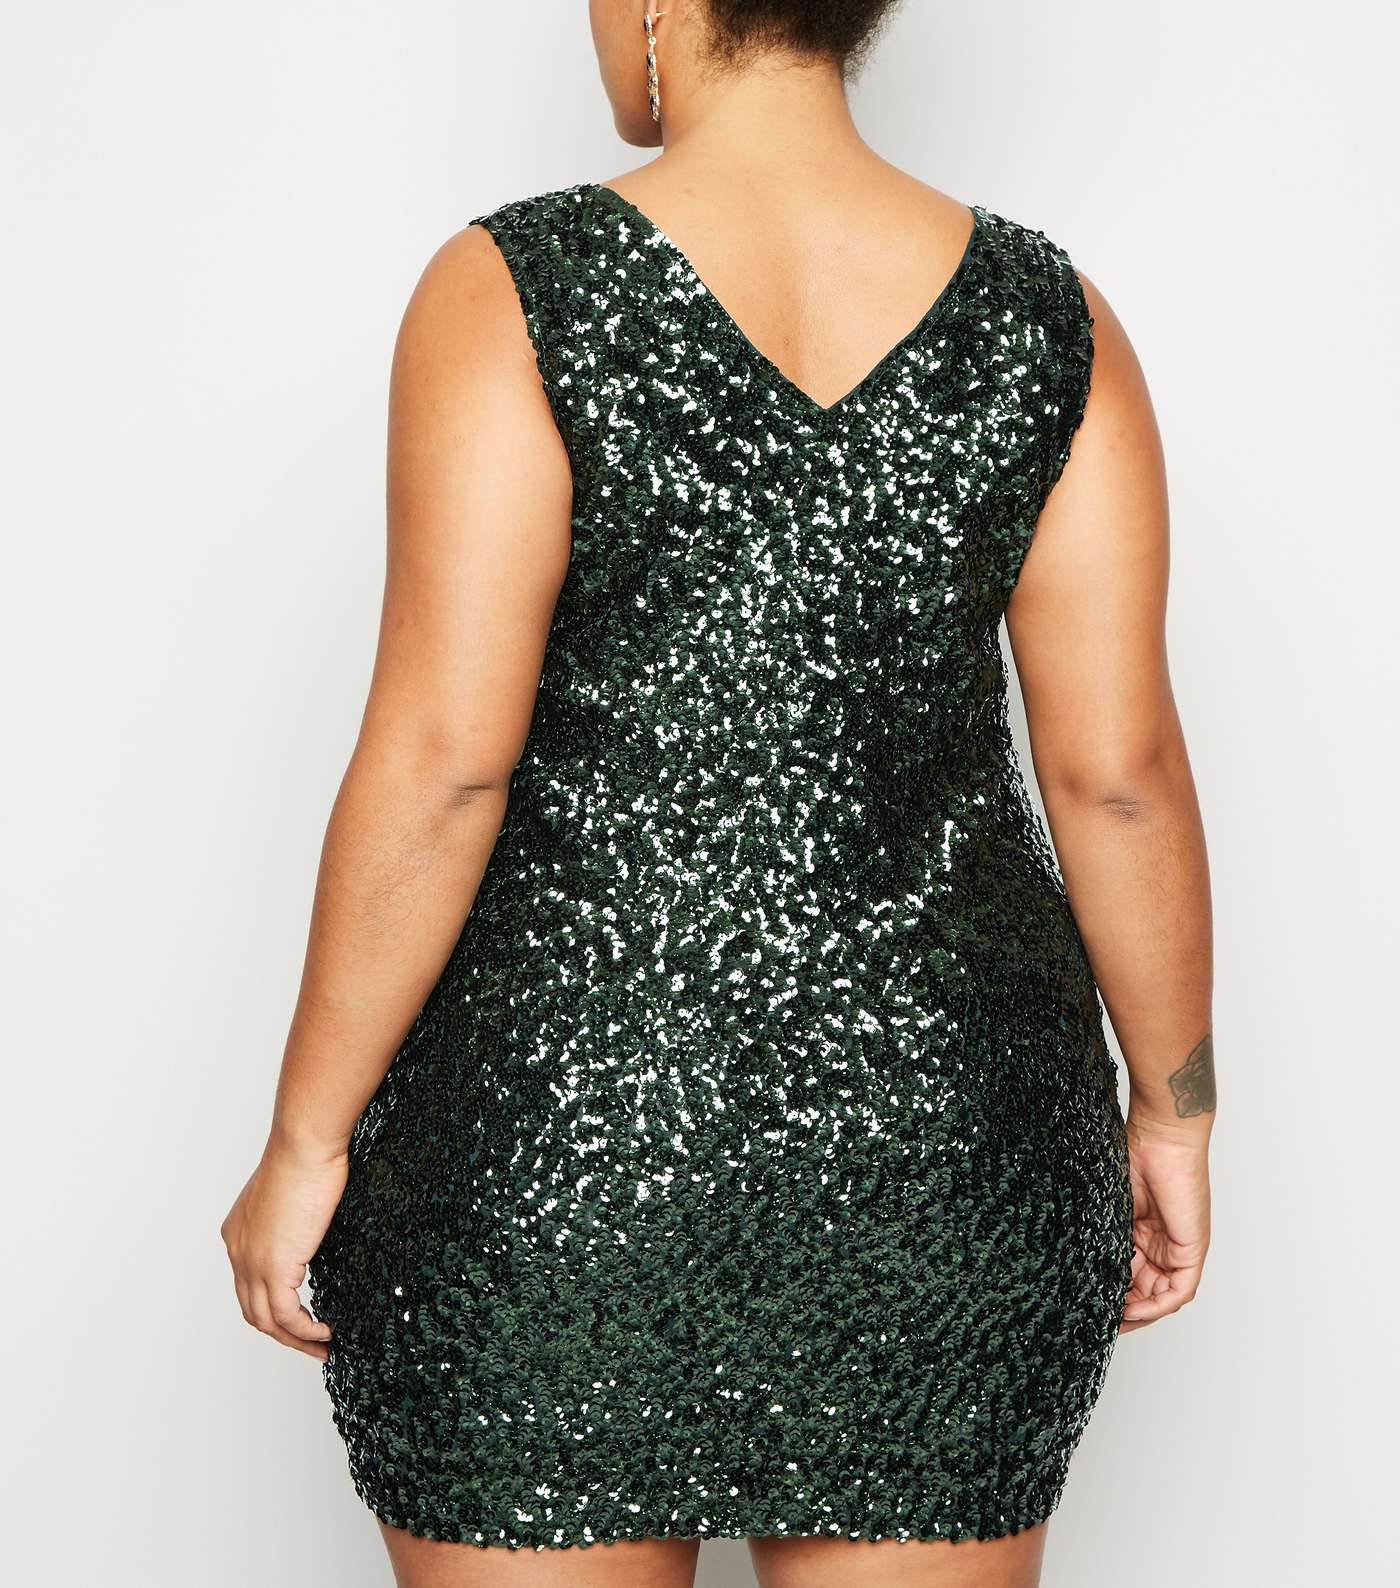 Apricot Curves Green Sequin Bodycon Dress Image 3